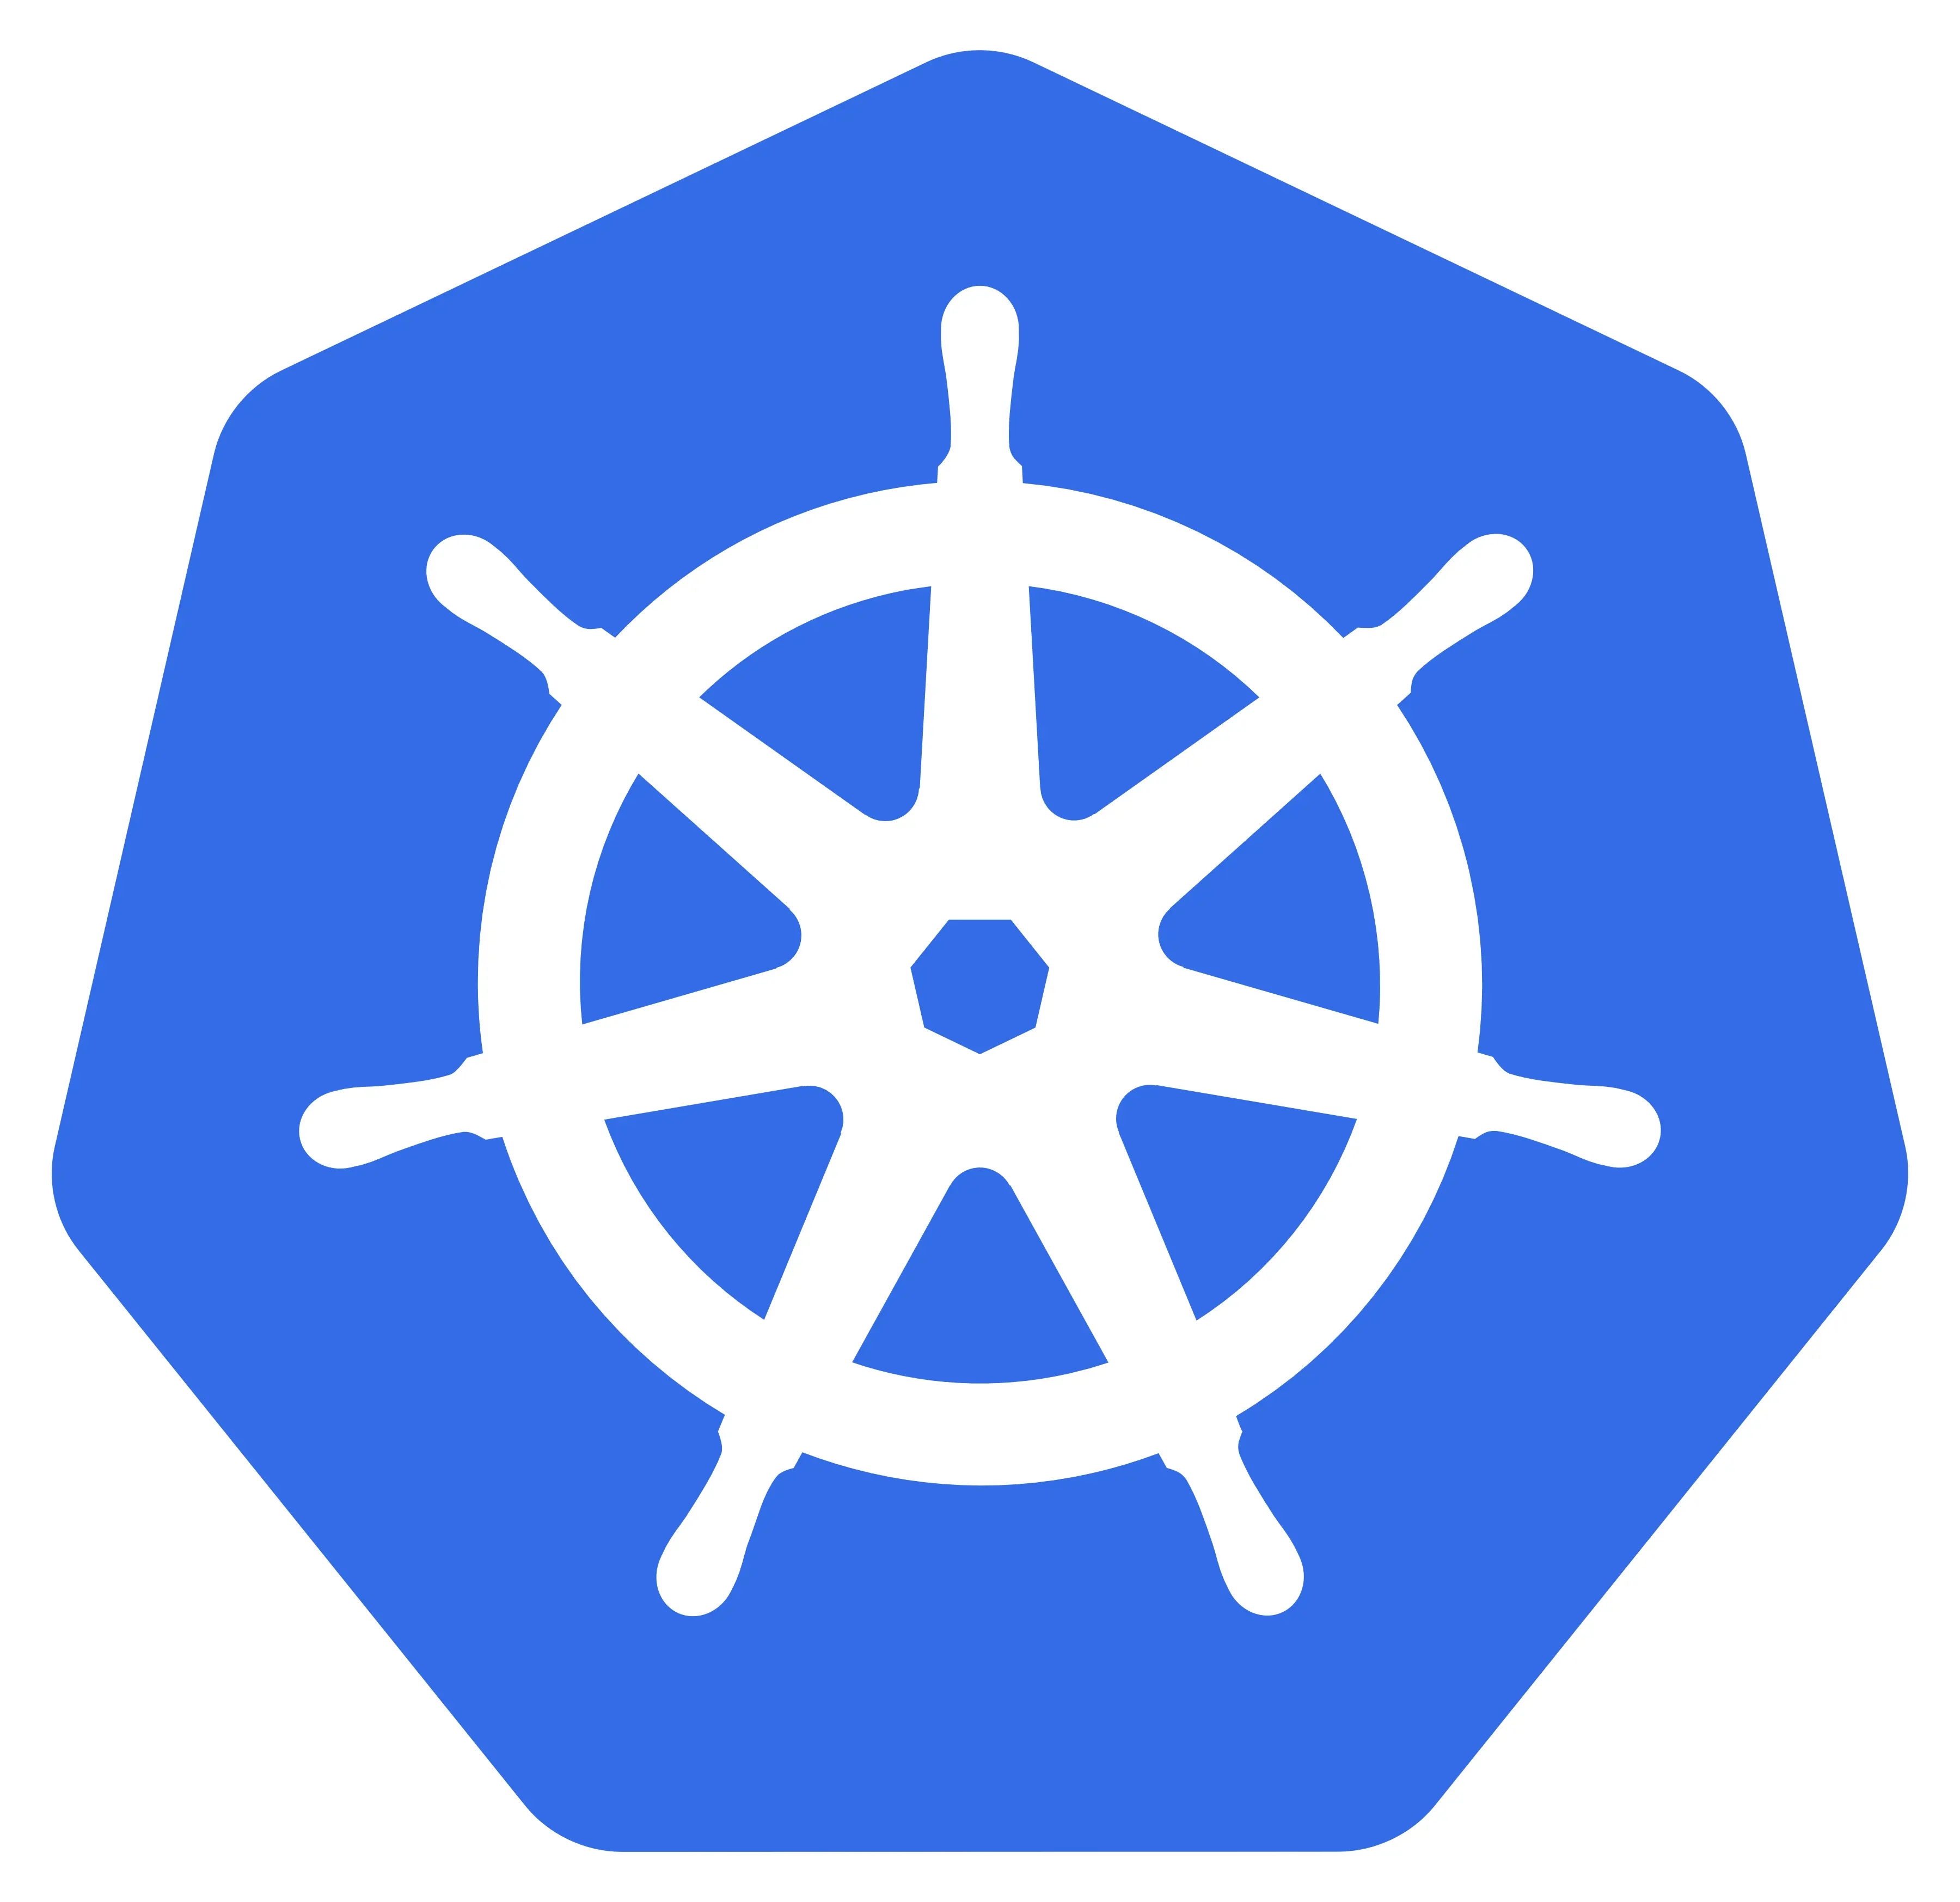 What should I do if Kubernetes'NameSpace can't be deleted?